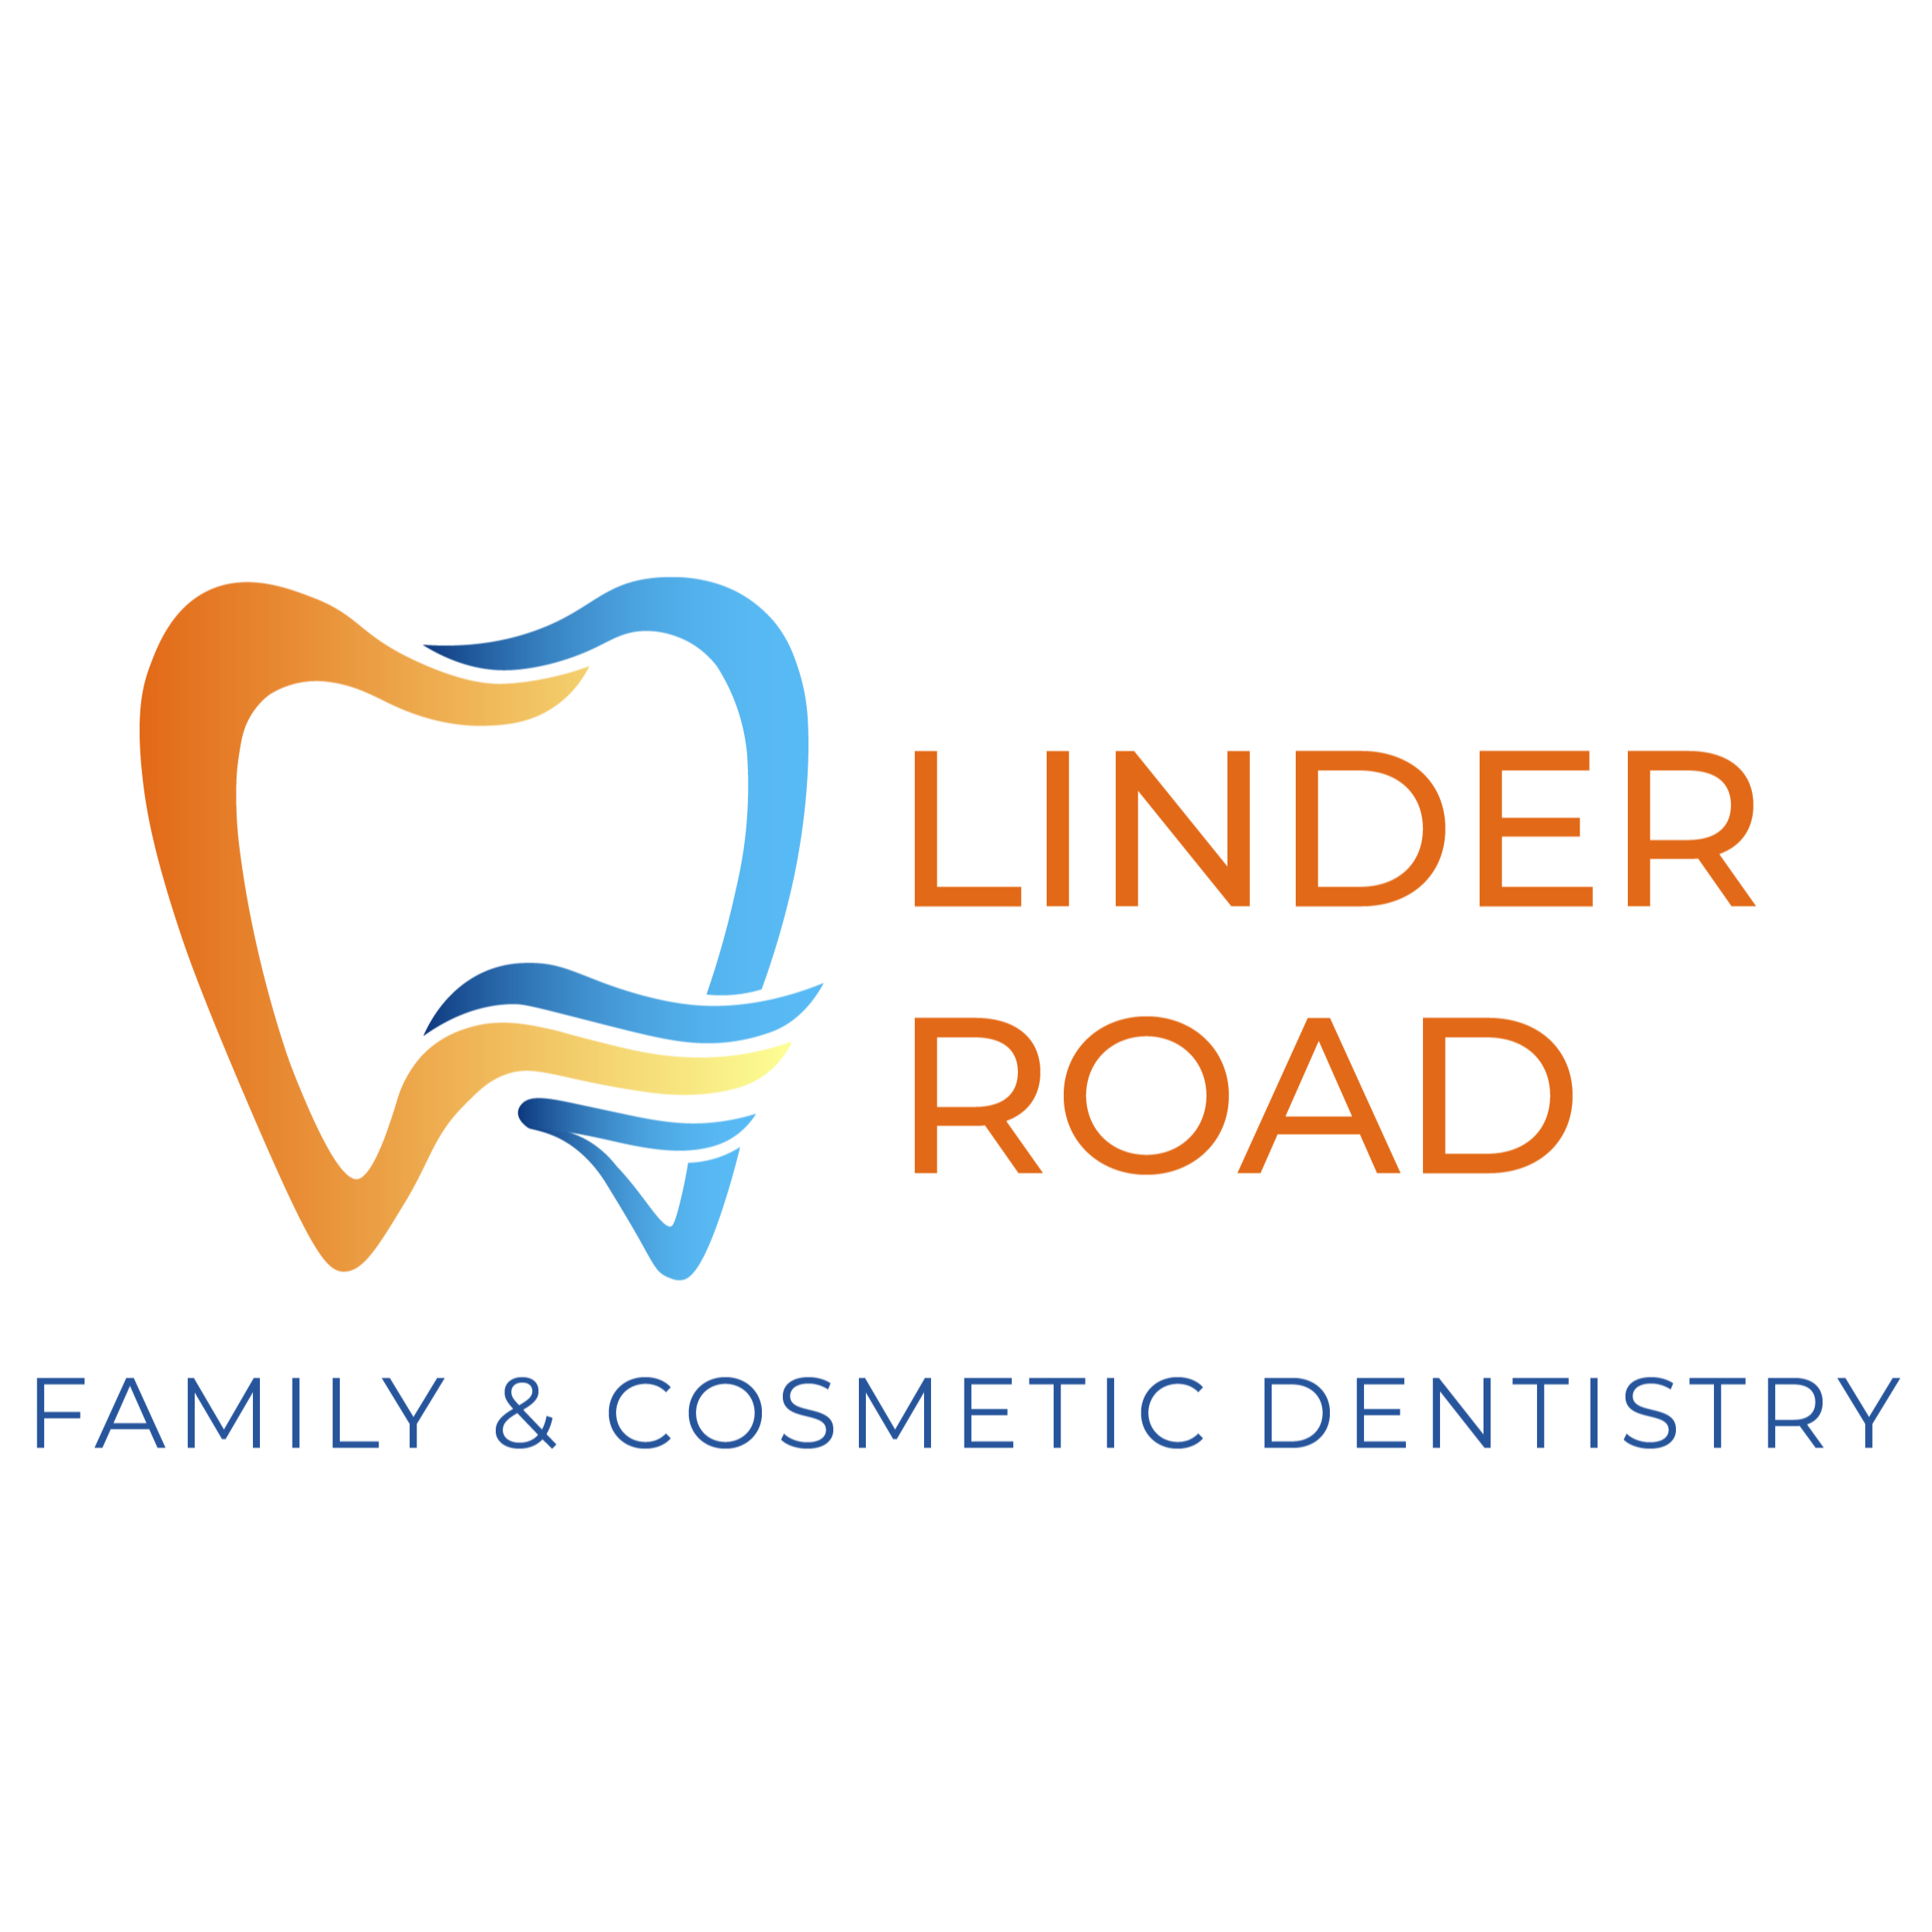 Linder Road Family & Cosmetic Dentistry